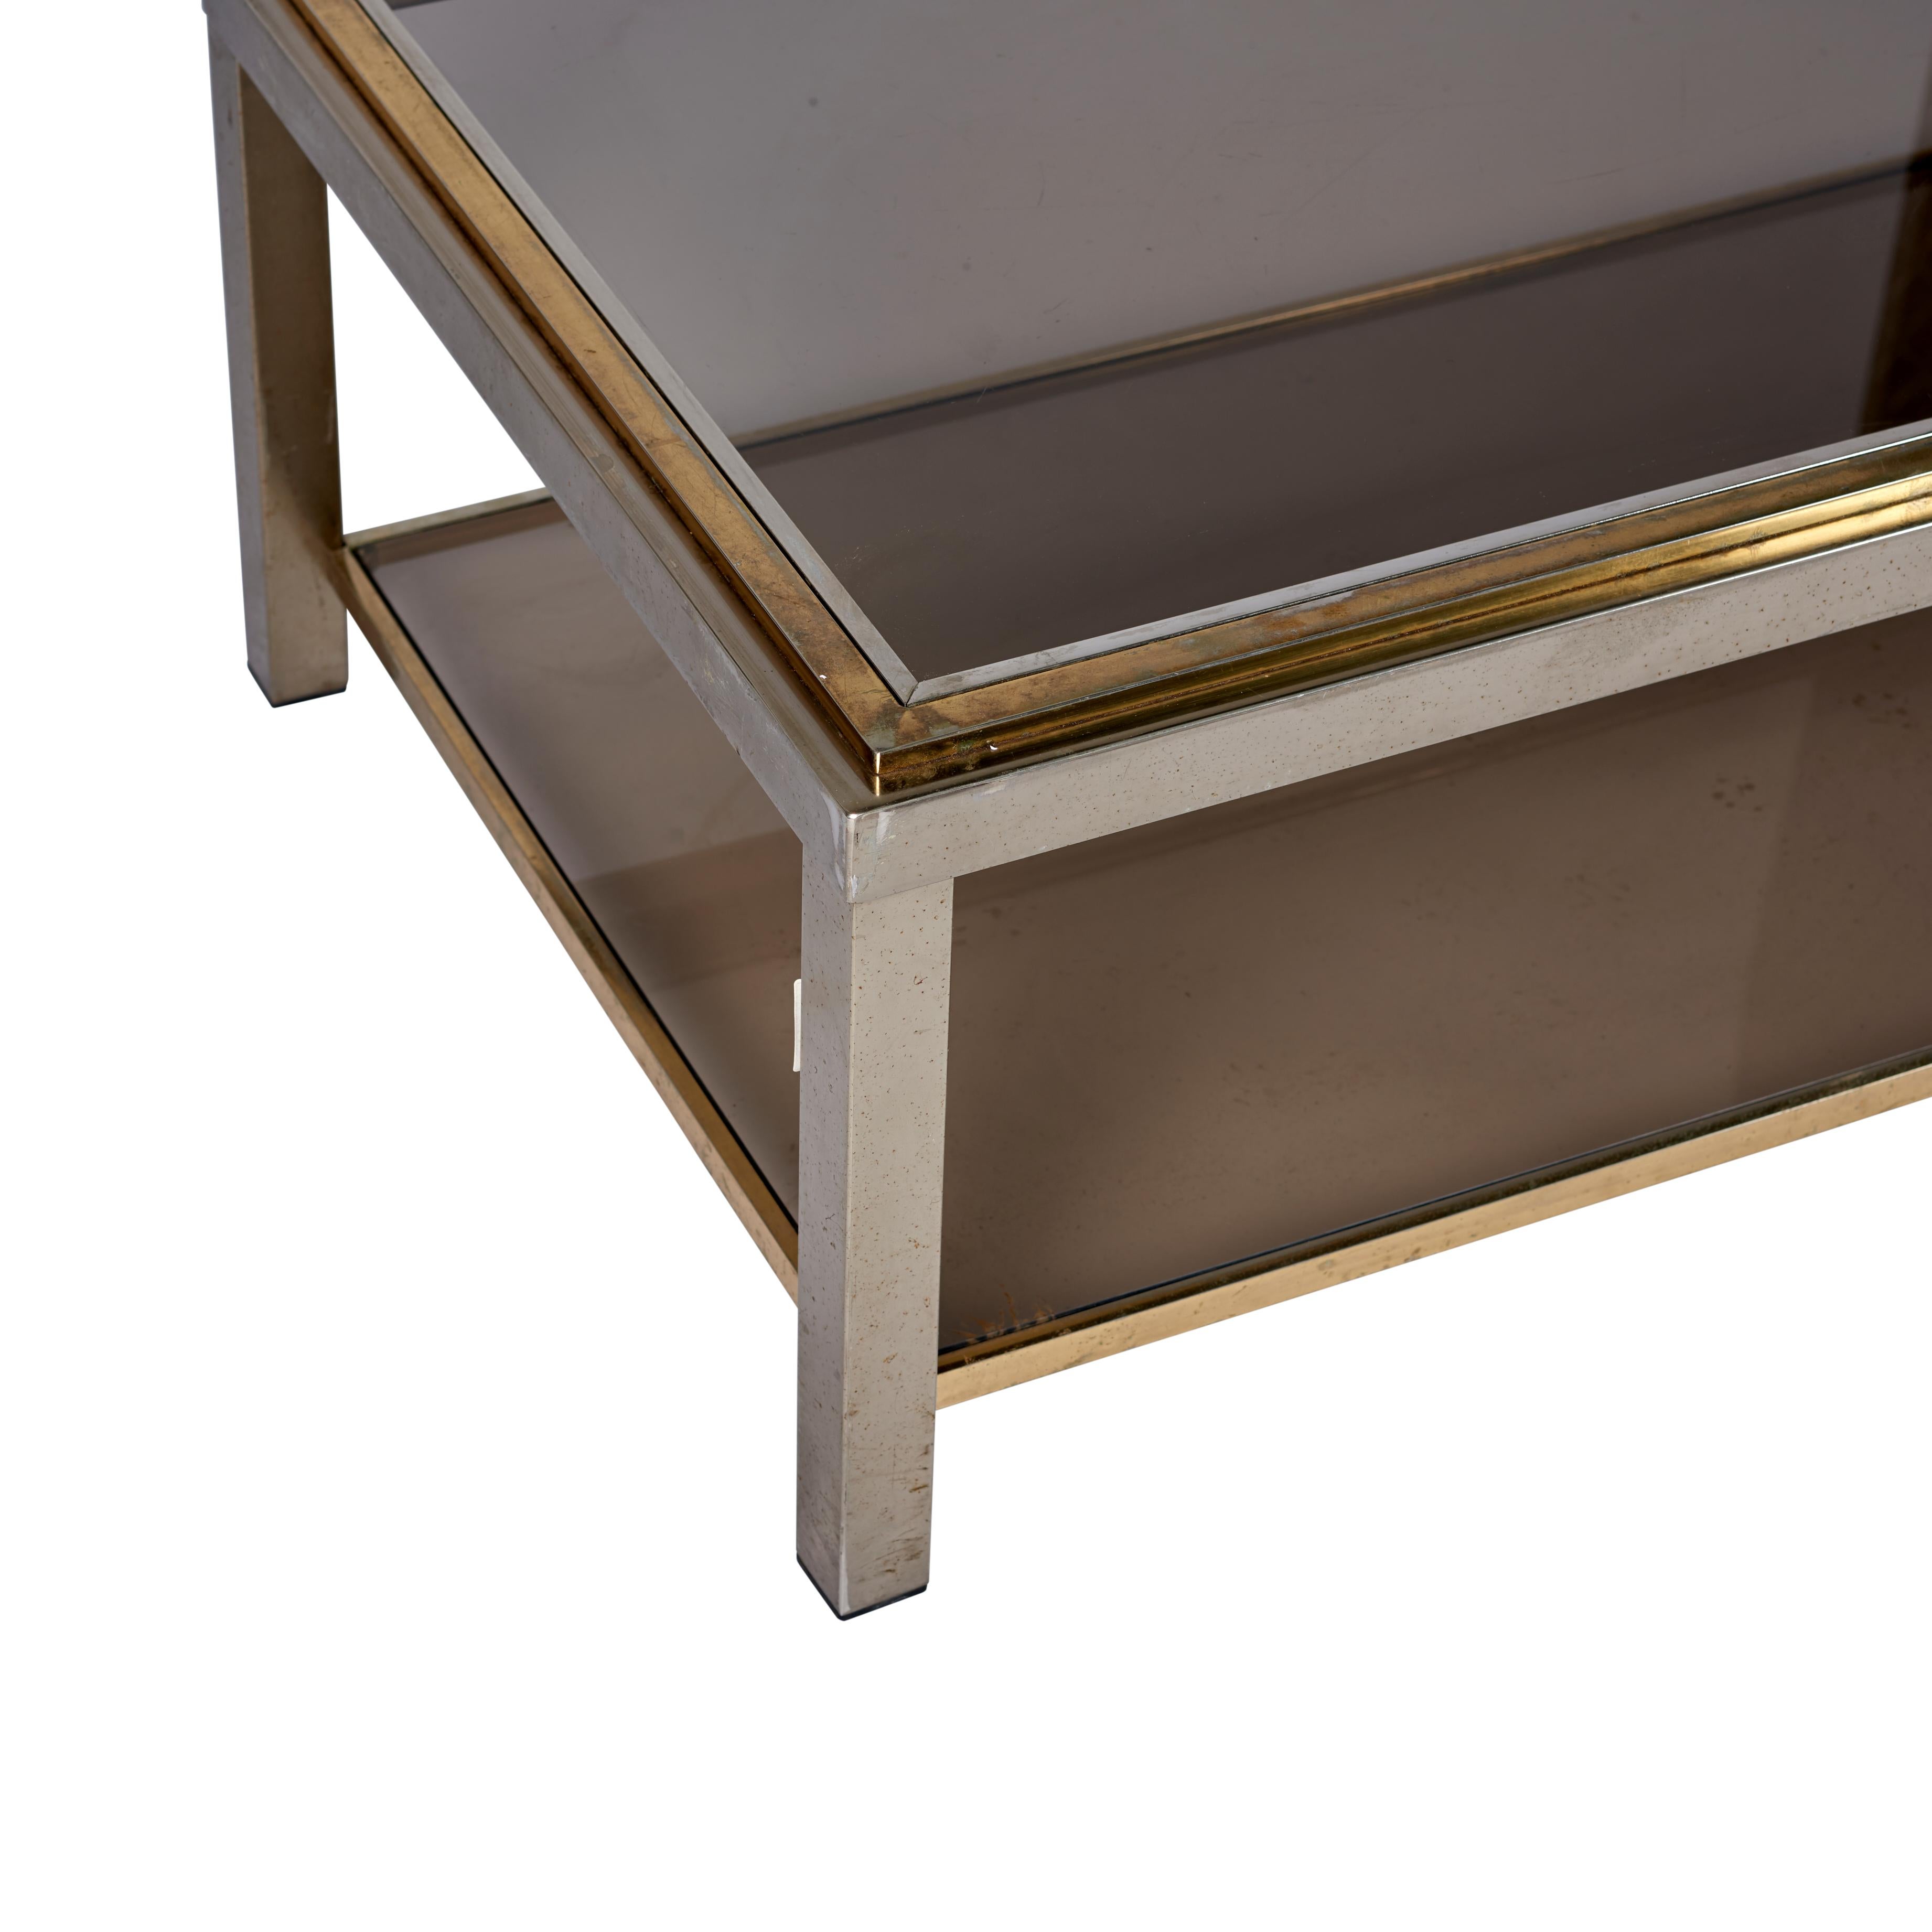 20th Century 1950s Italian Chrome and Brass Coffee Table by Willy Rizzo